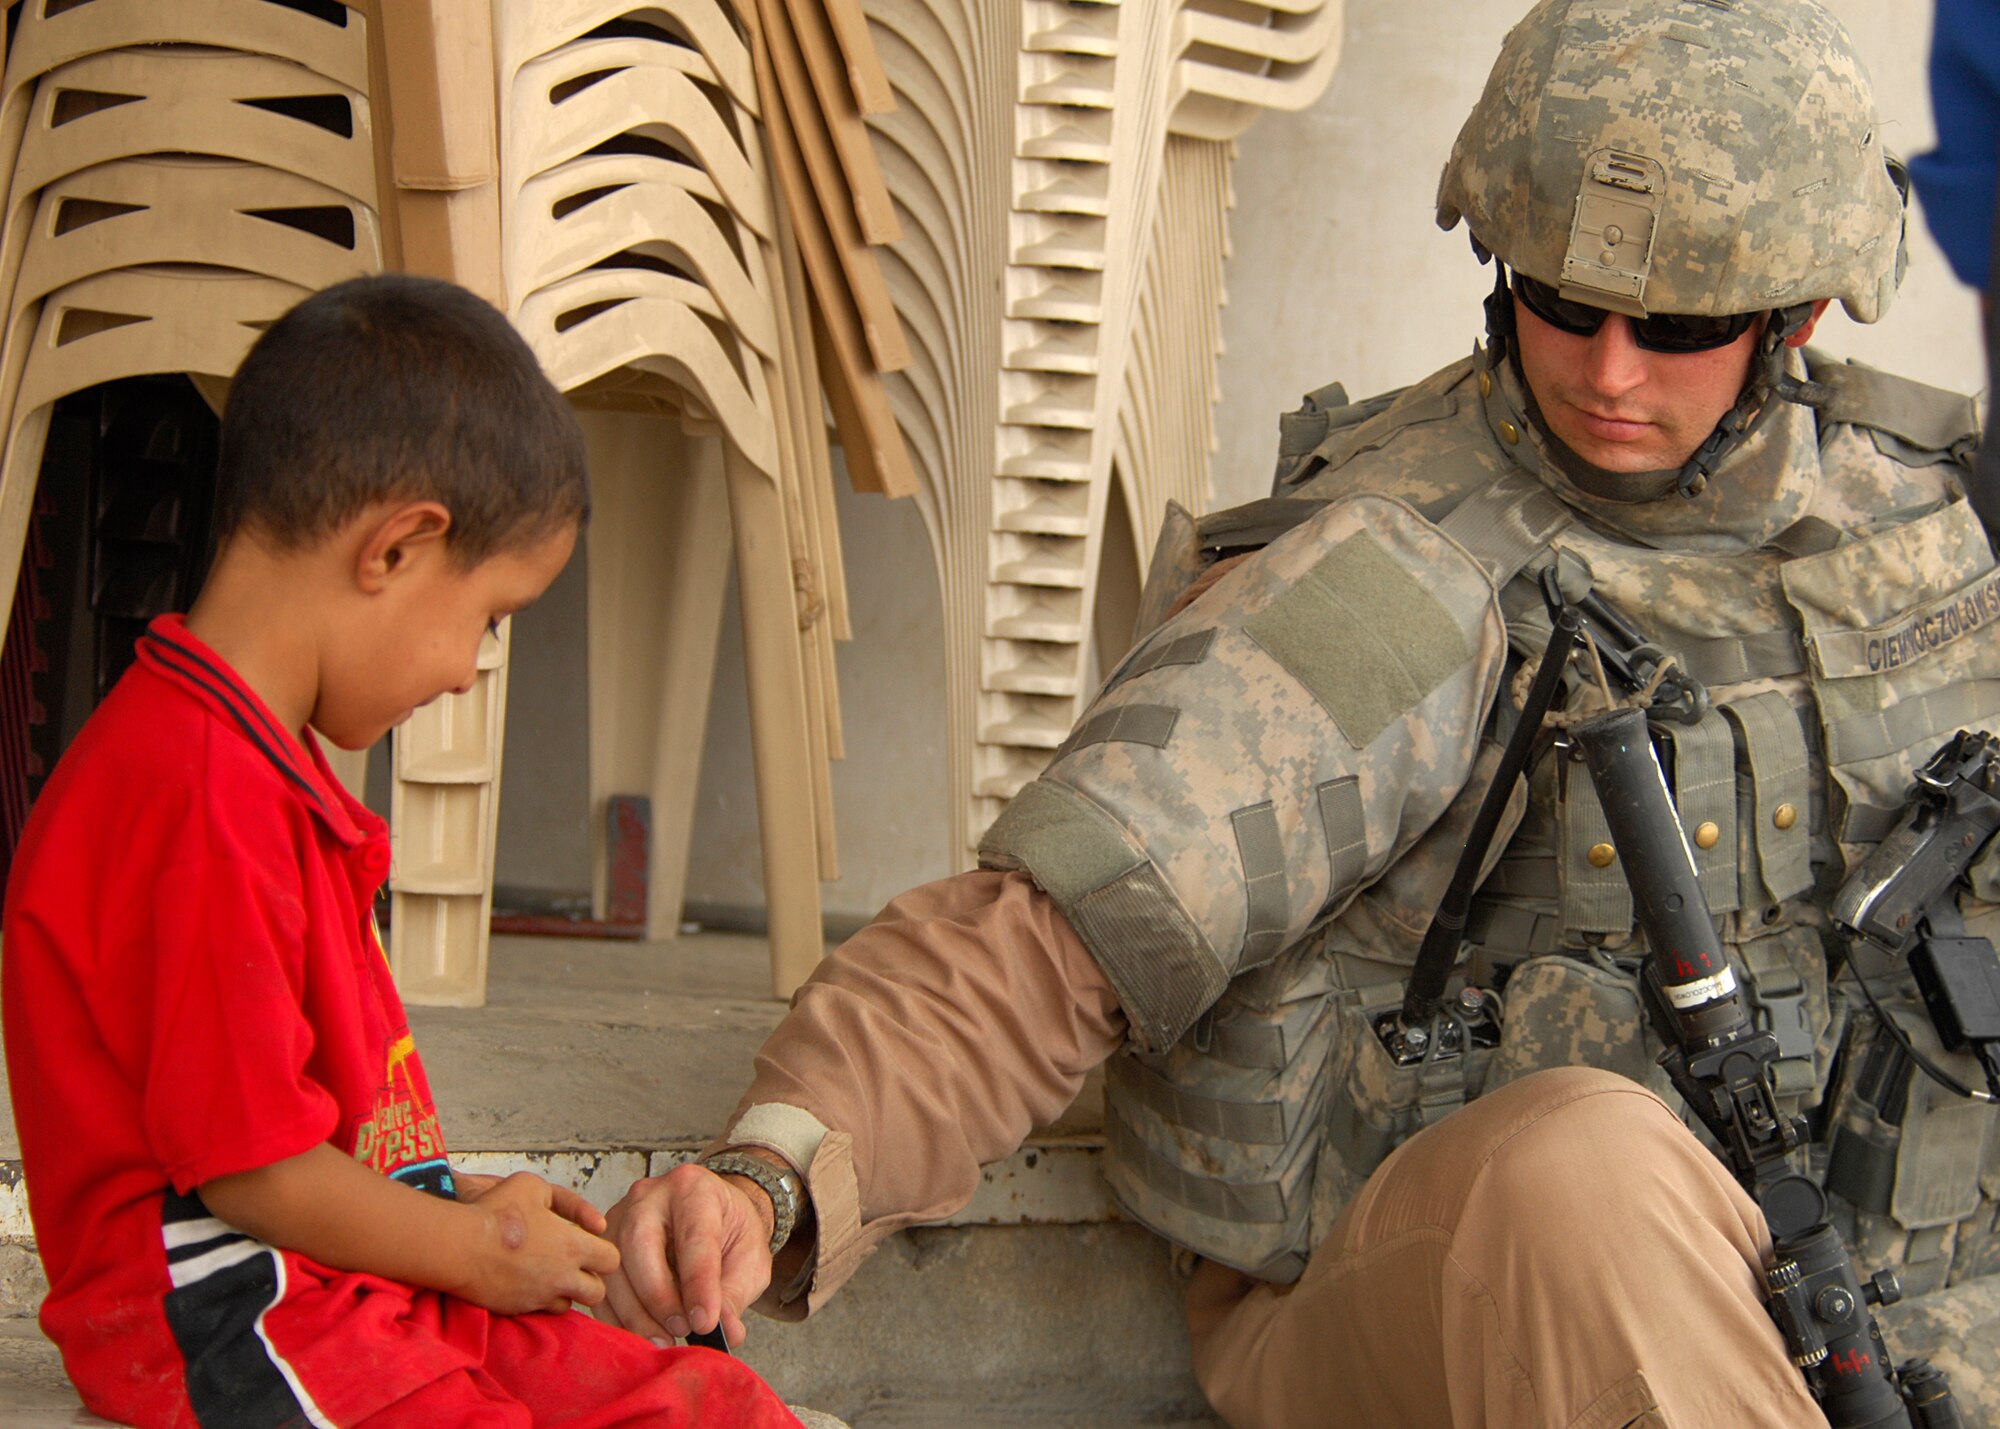 DOURA, IRAQ -- Staff Sgt. Isaac Ciemnoczolowski builds a matchbook house with an Iraqi boy during a combined patrol with Iraqi police Aug. 30. The patrol was training for Iraqi police in tactics, techniques and procedures here. Ciemnoczolowski is one of more than 150 Joint Source Solution Airmen assigned to the 732nd Expeditionary Security Forces Squadron, Det. 3, which performs Police Transition Team missions at six Iraqi police stations and one Iraqi police district headquarters in the East and West Rasheed Districts of Baghdad. The 732nd ESFS, Det. 3, stationed at Victory Base in Baghdad, also supports two 24-hour Joint Security Stations. JSS Airmen are assigned duties outside their normal Air Force specialties to fill in vacant positions that Soldiers cannot support due to the Army's heavy theater operations tempo. Ciemnoczolowski is deployed from Minot Air Force Base, N.D. (U.S. Navy photo/Petty Officer 2nd Class Kelvin Surgener)  